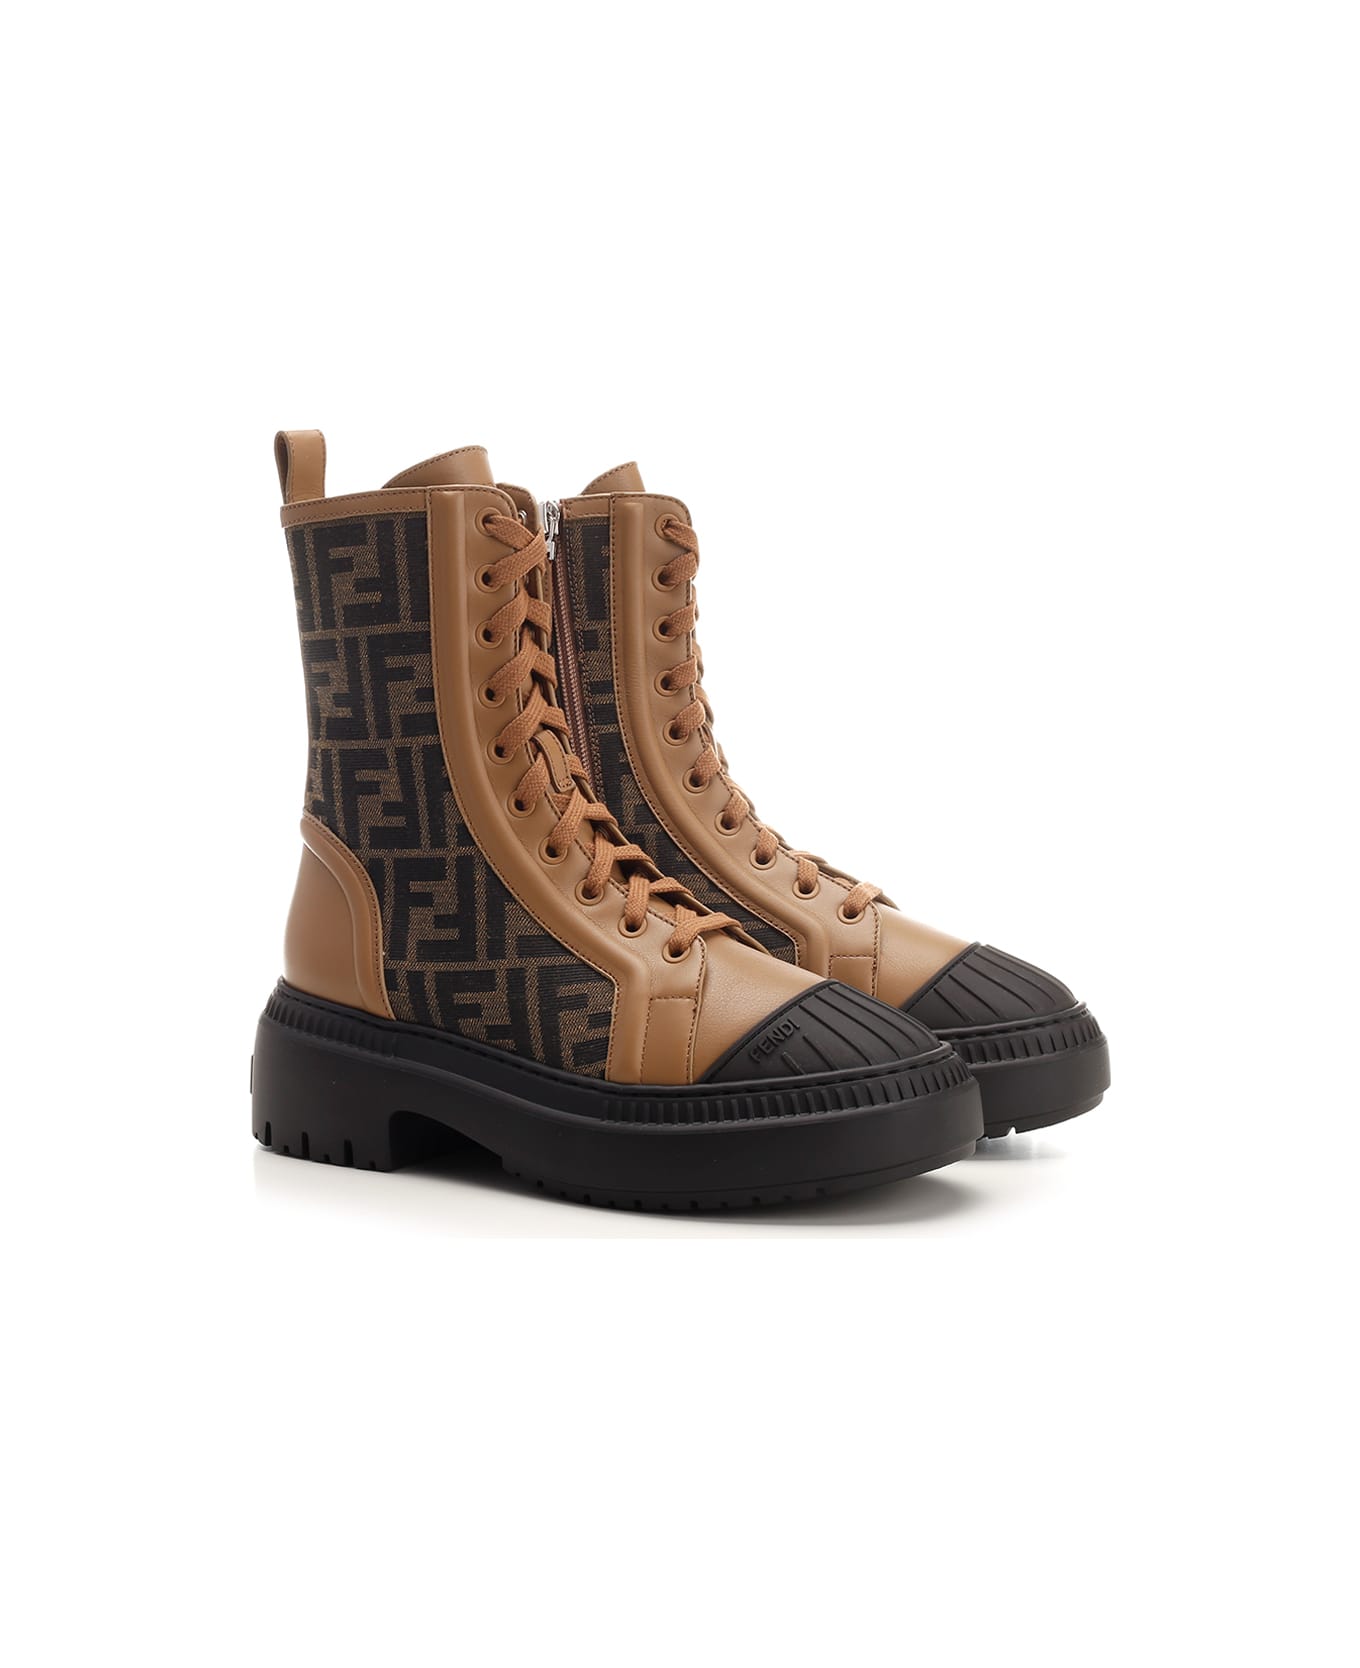 Fendi Domino Leather And Ff Fabric Ankle Boots - Beige ブーツ